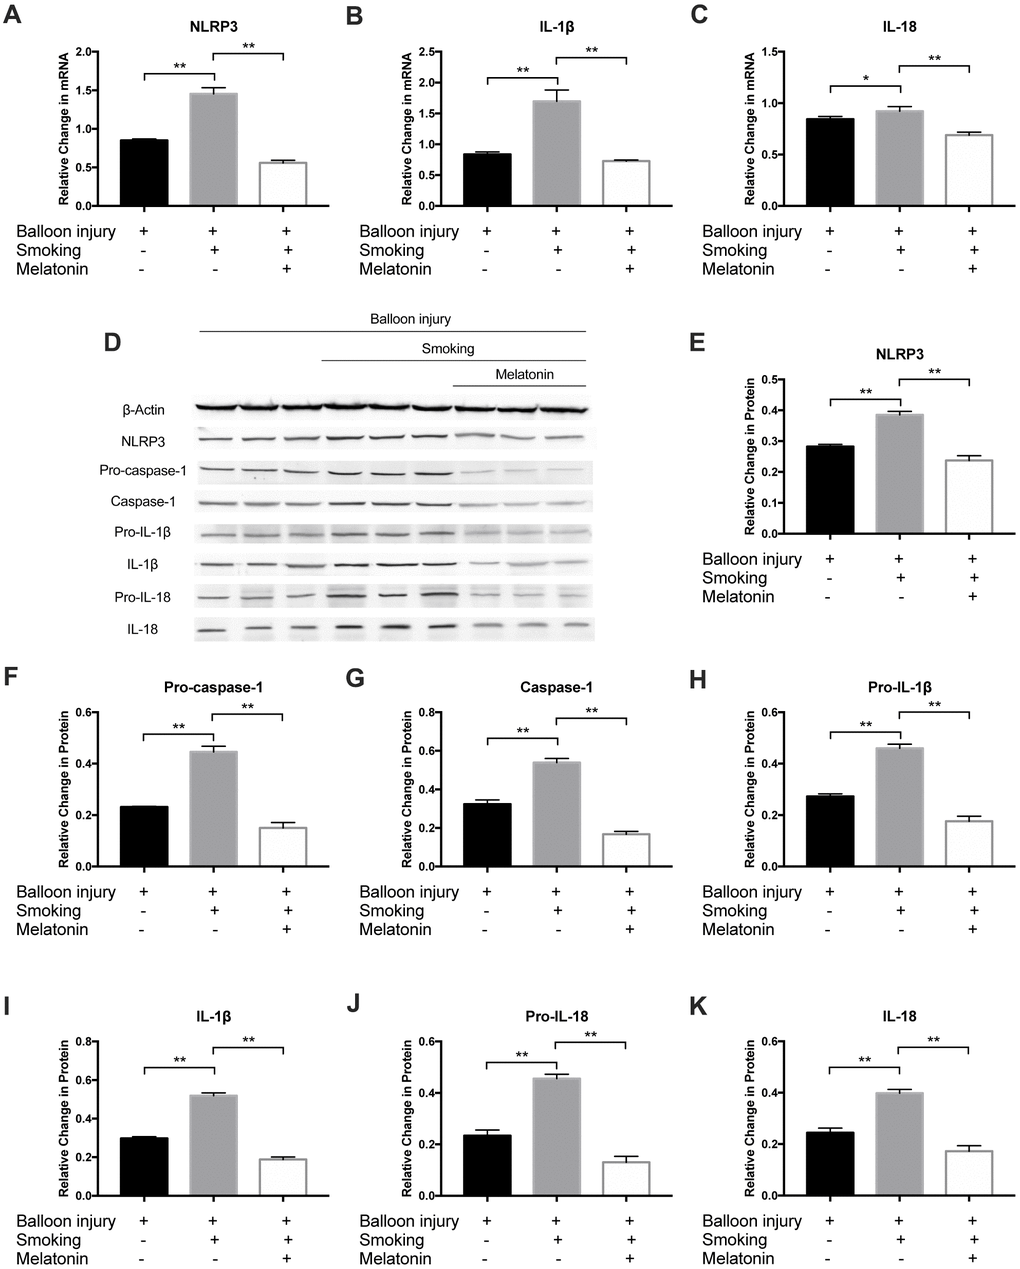 Melatonin inhibited expression of NLRP3 inflammasome in vivo. (A–C) The mRNA level of NLRP3, IL-1β and IL-18 was detected by RT-PCR. (D–K) NLRP3, Pro-Caspase-1, Caspase-1, Pro-IL-1β, IL-1β, Pro-IL-18 and IL-18 were detected by Western blot. *p p n = 3).